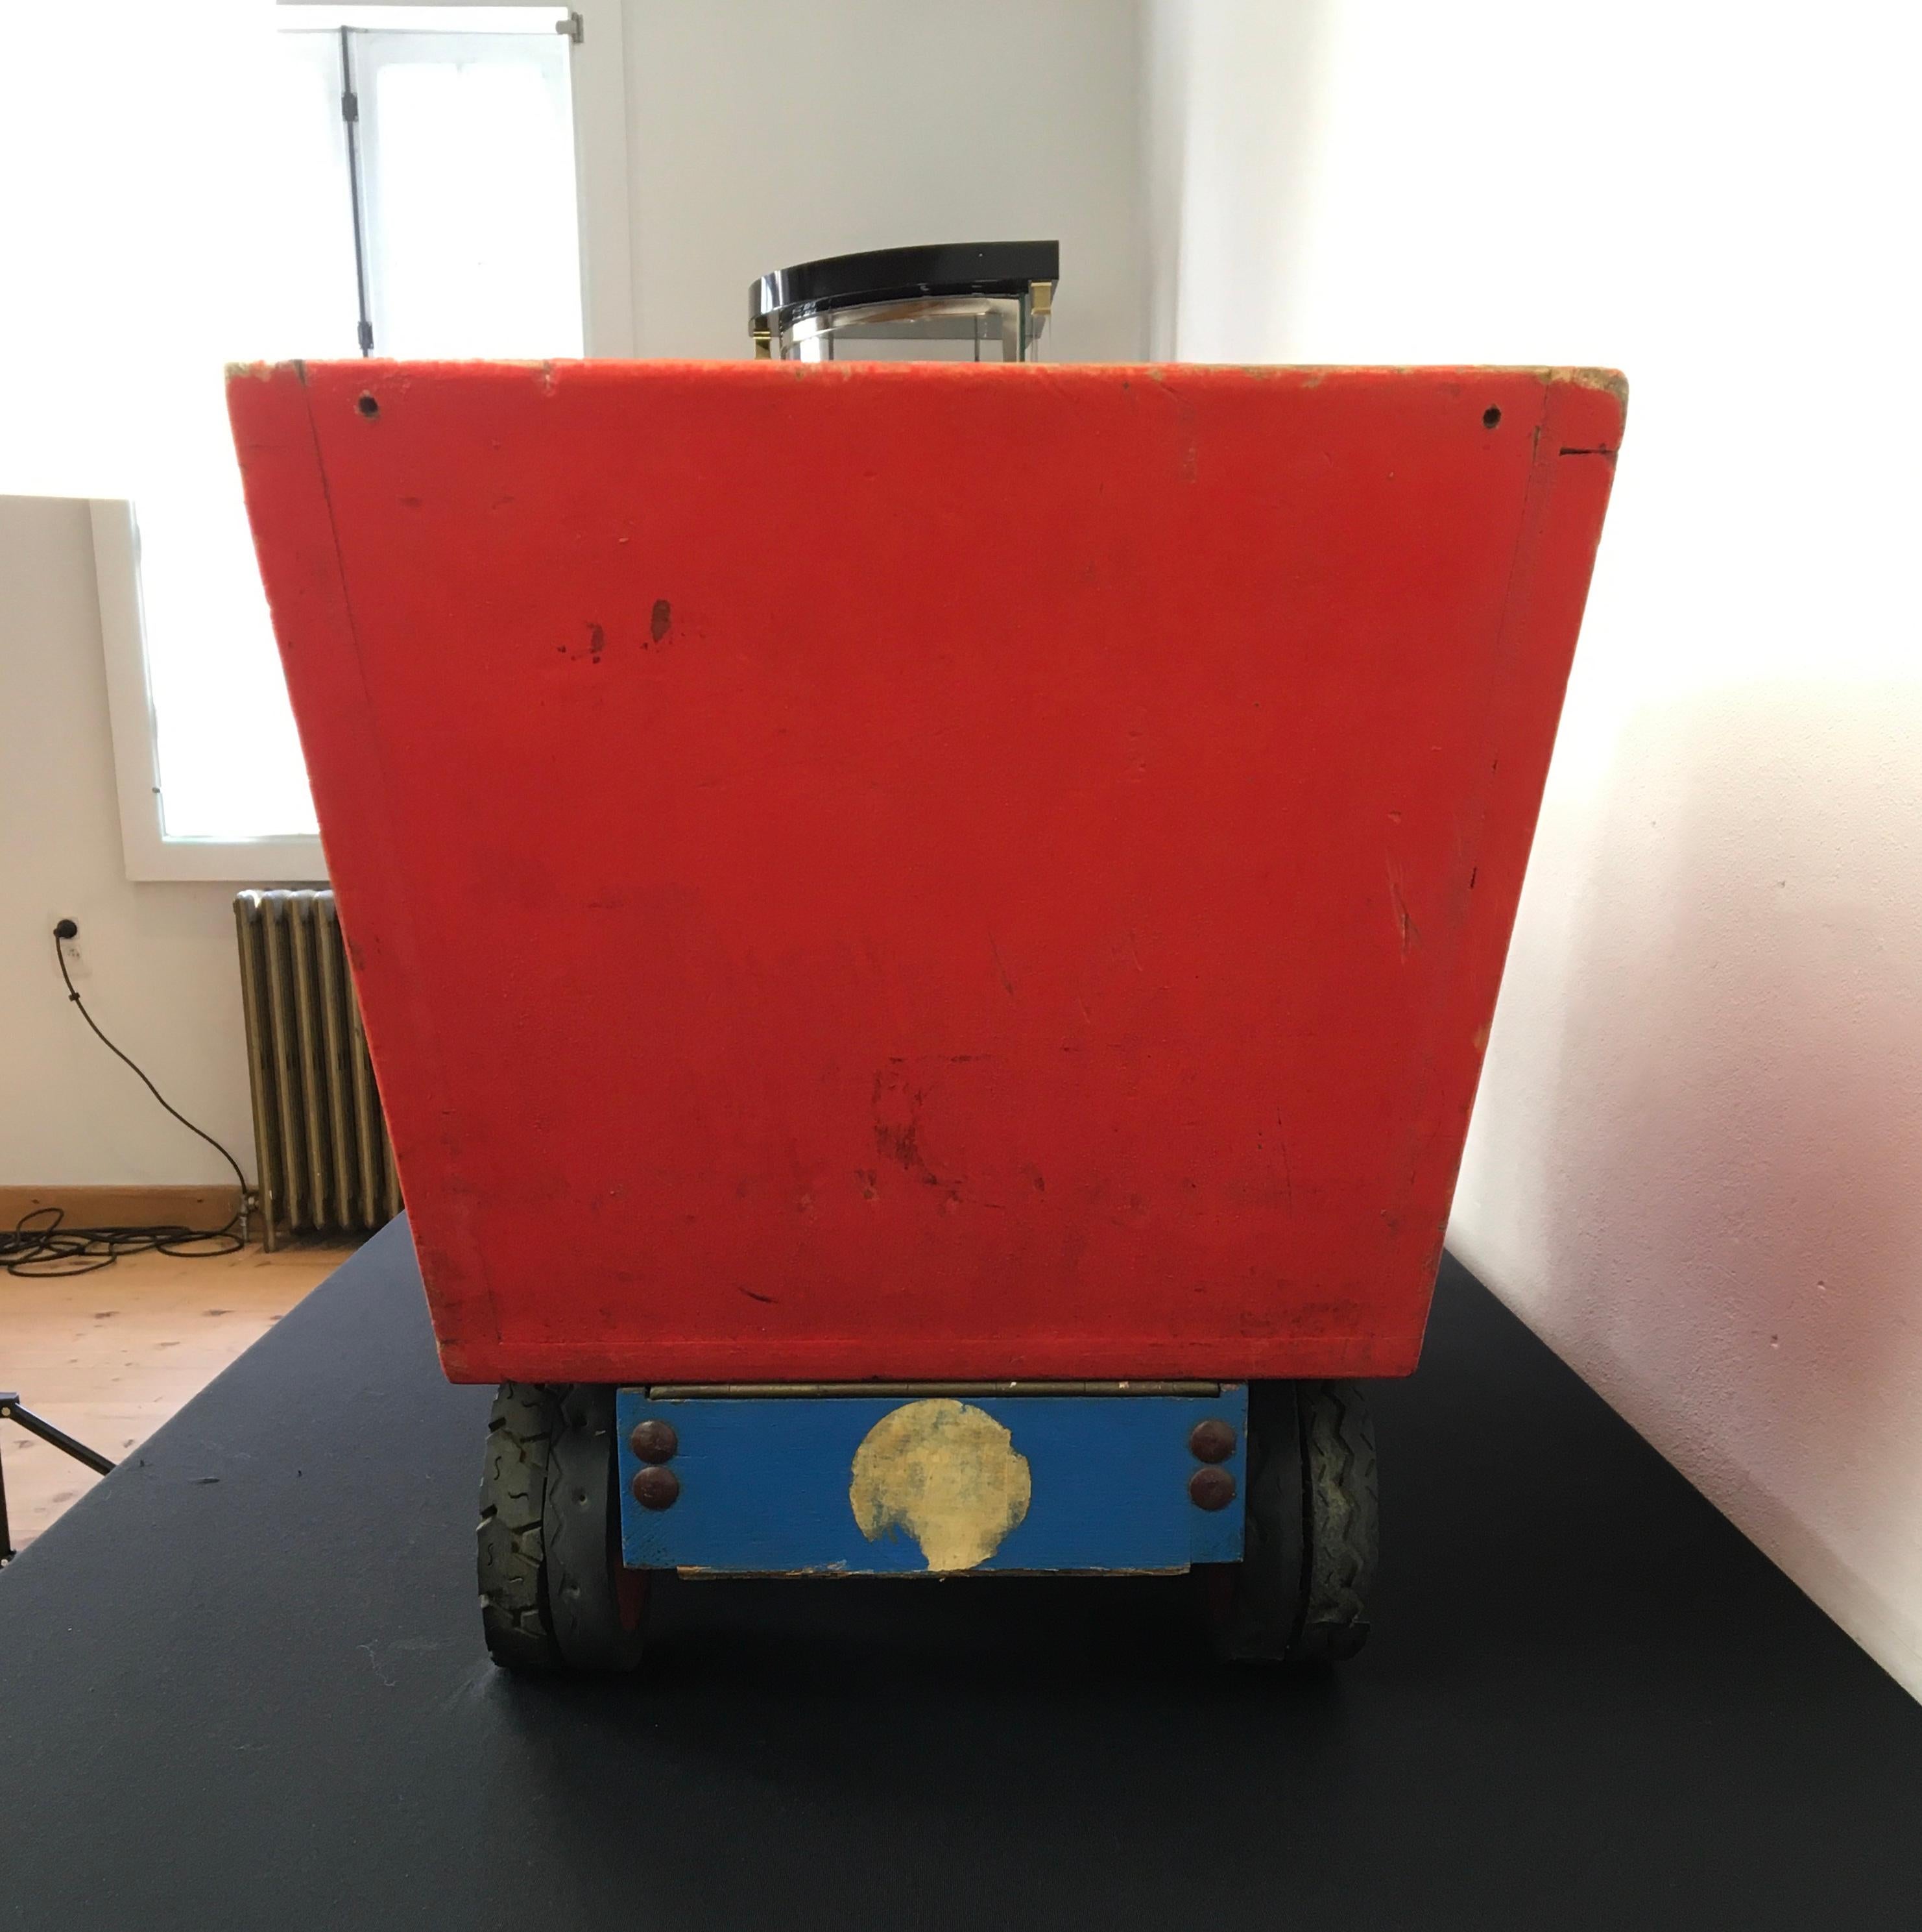 XL Red Wooden Dump Truck Toy, 1950s For Sale 7